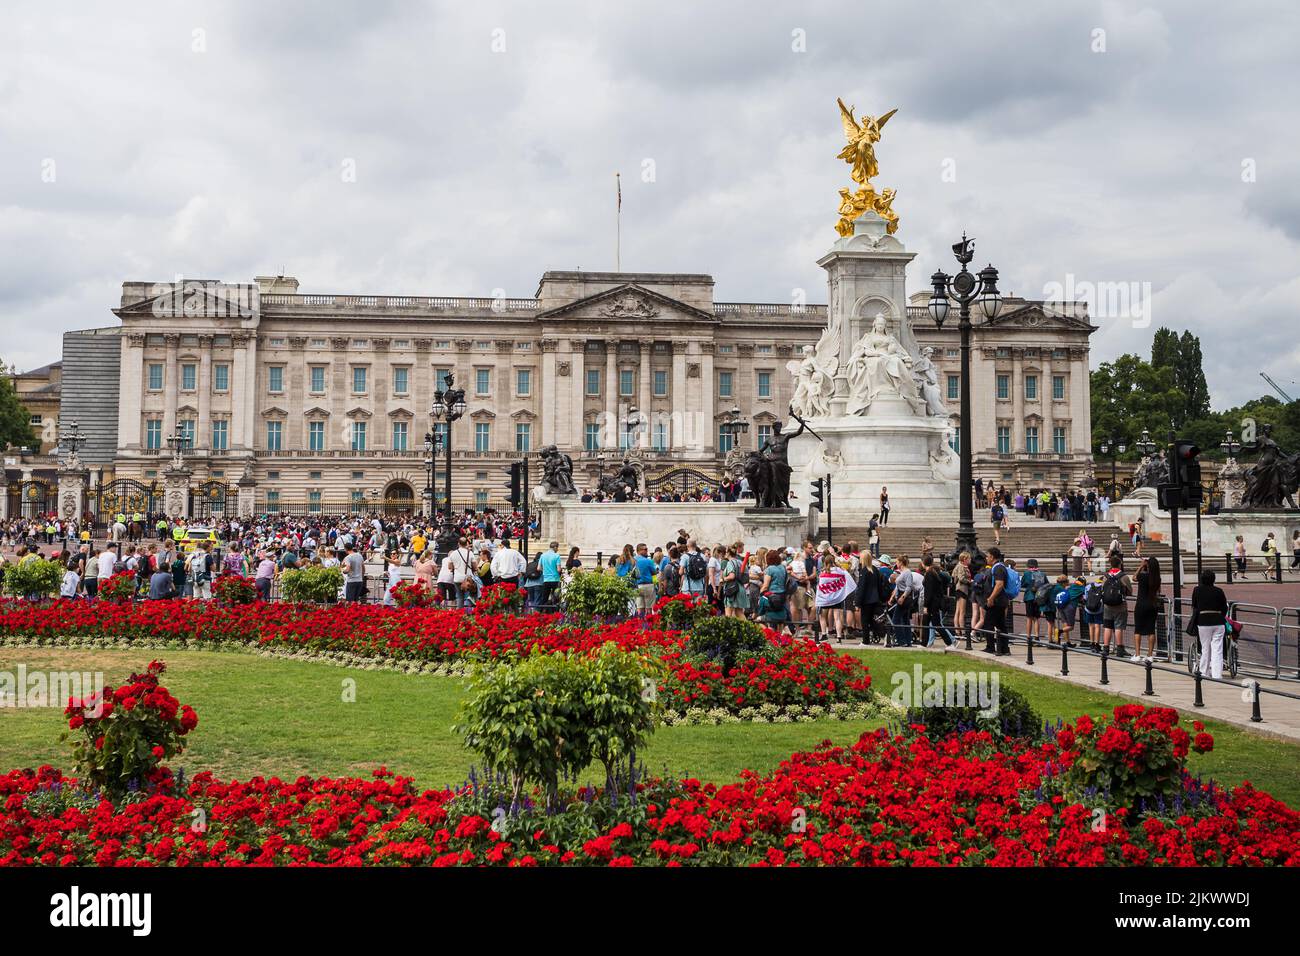 Flowers in bloom around the outside of Buckingham Palace in London seen in July 2022 as tourists gather to watch the Changing of the Guard cememony. Stock Photo